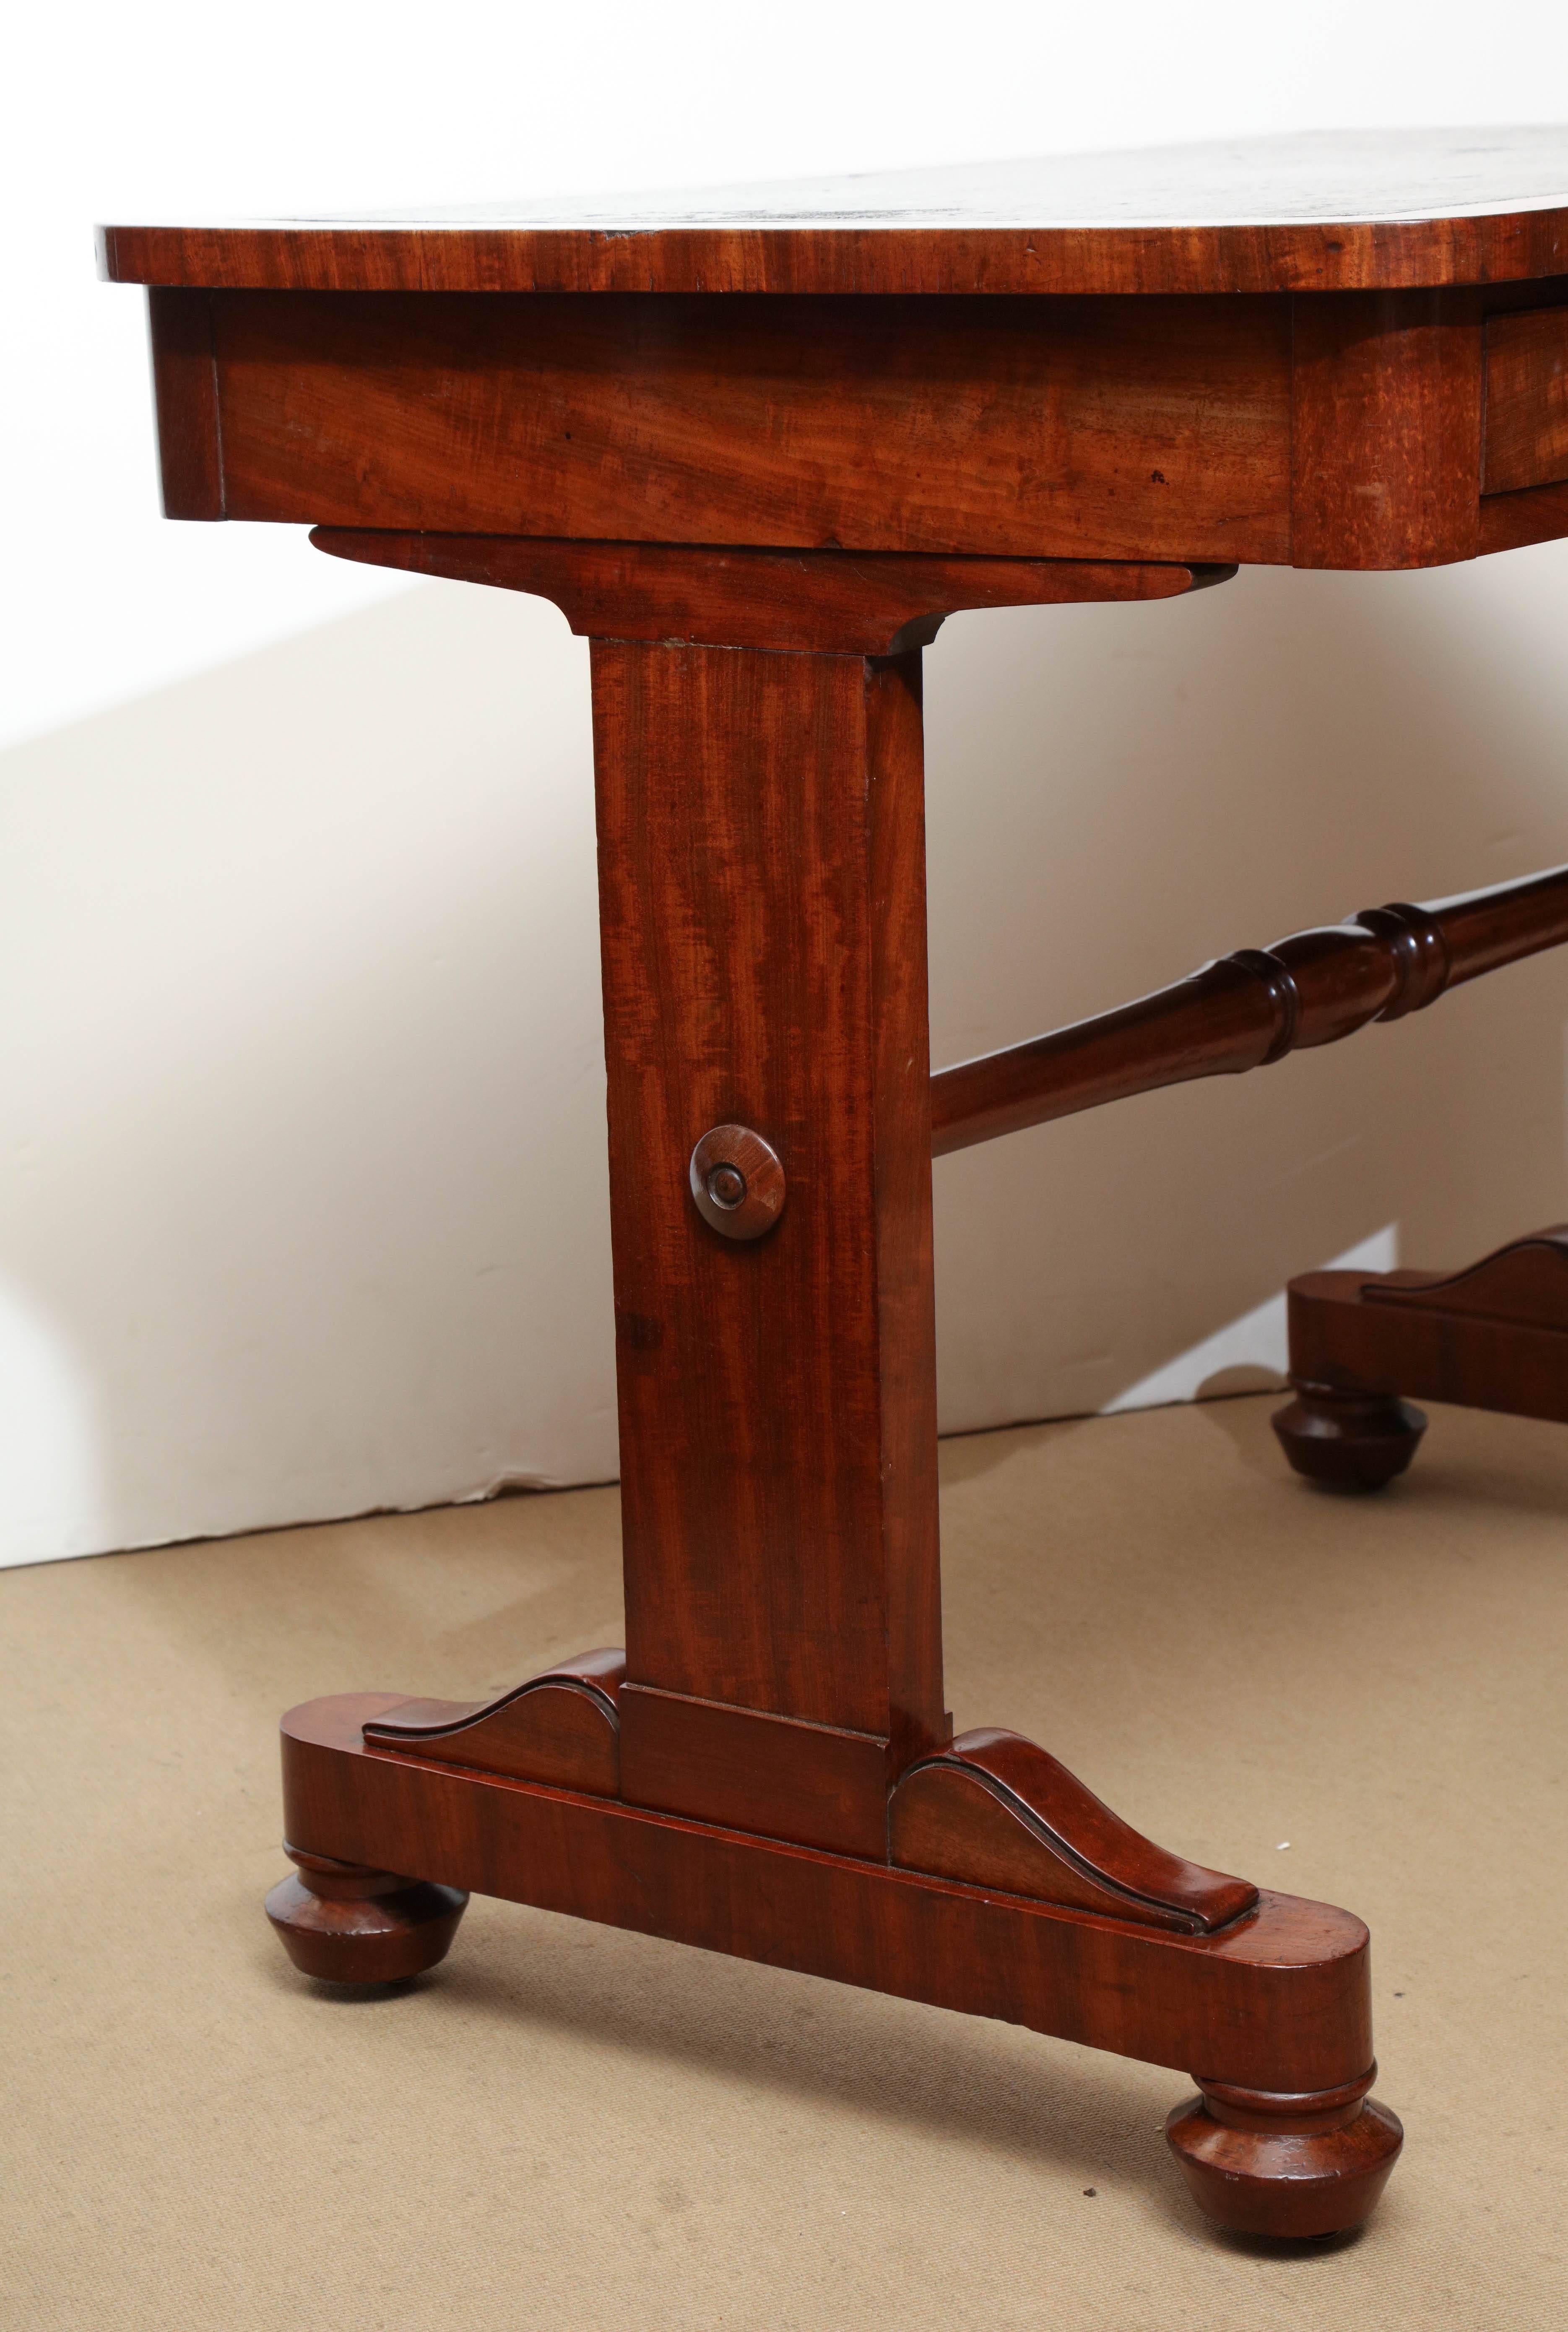 Early 19th Century English, Mahogany and Leather Top Desk by Gillows & Co 2